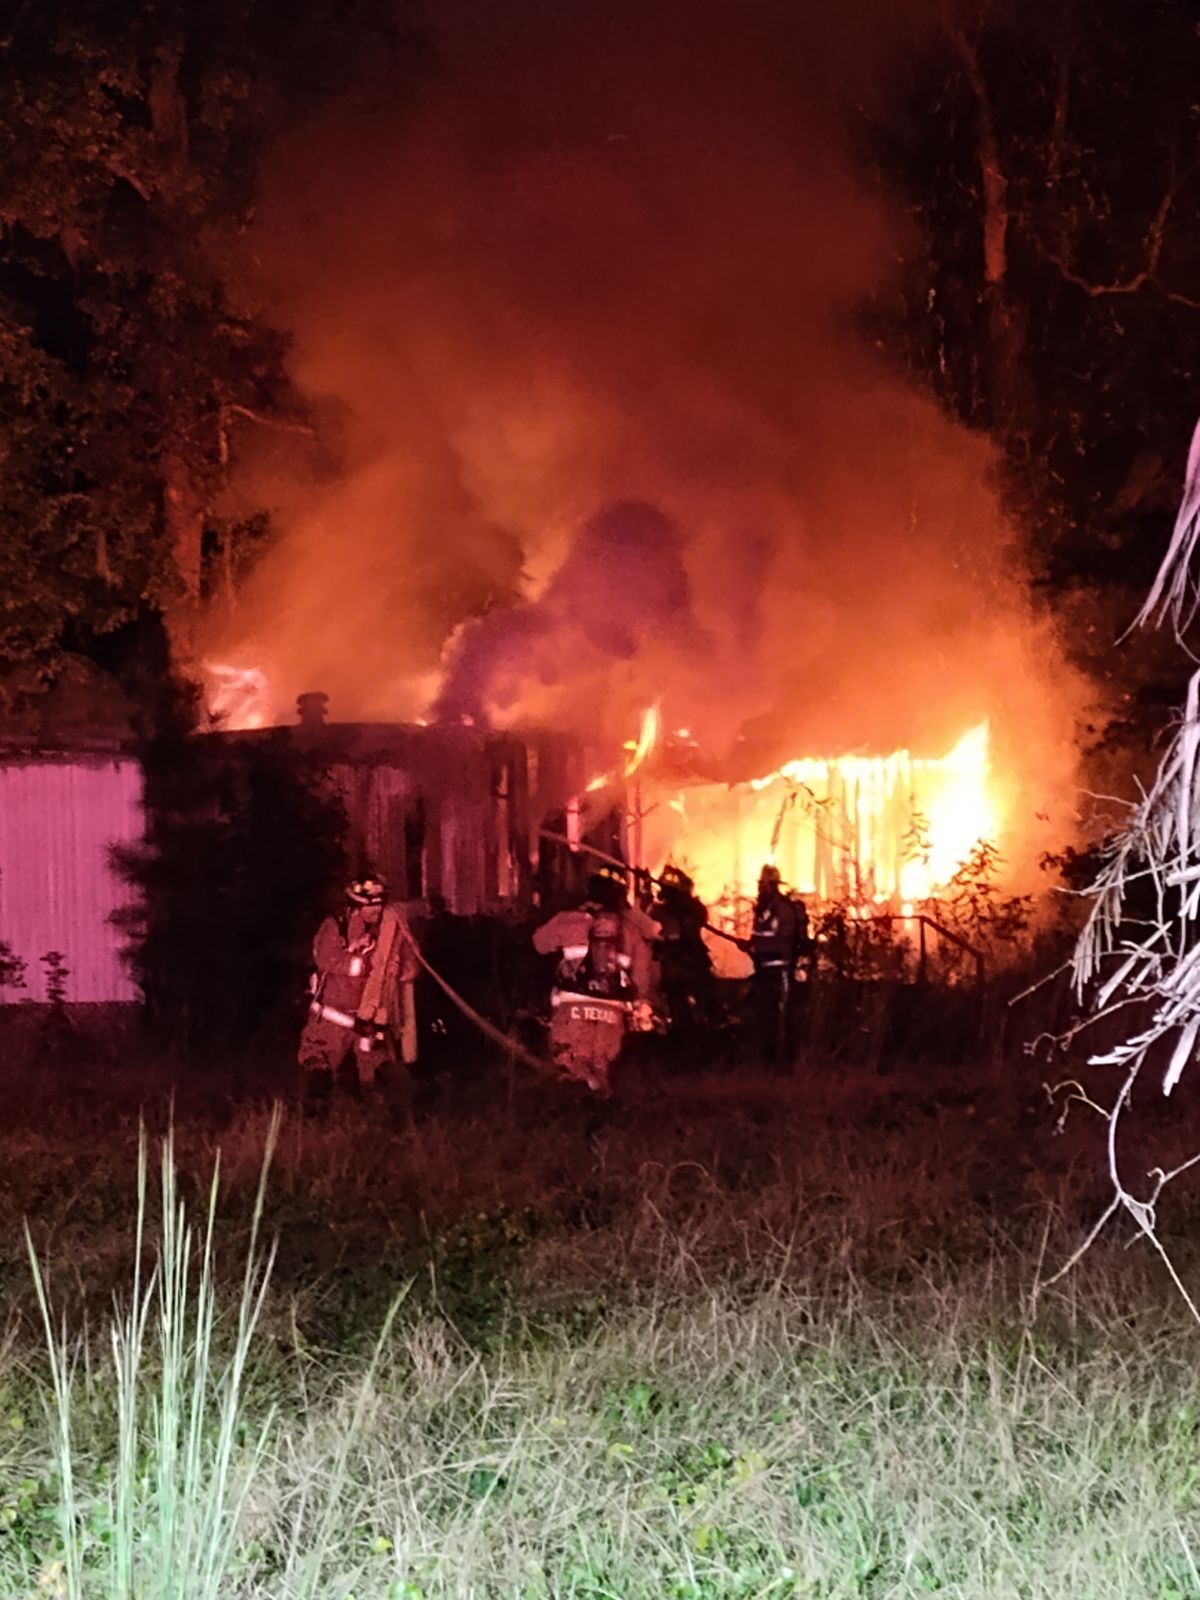 At approximately 11 p.m., Monday, Oct. 17, the Burton Fire District responded to a mobile home fire on Trask Parkway by Big Road. Photo courtesy of Burton Fire District